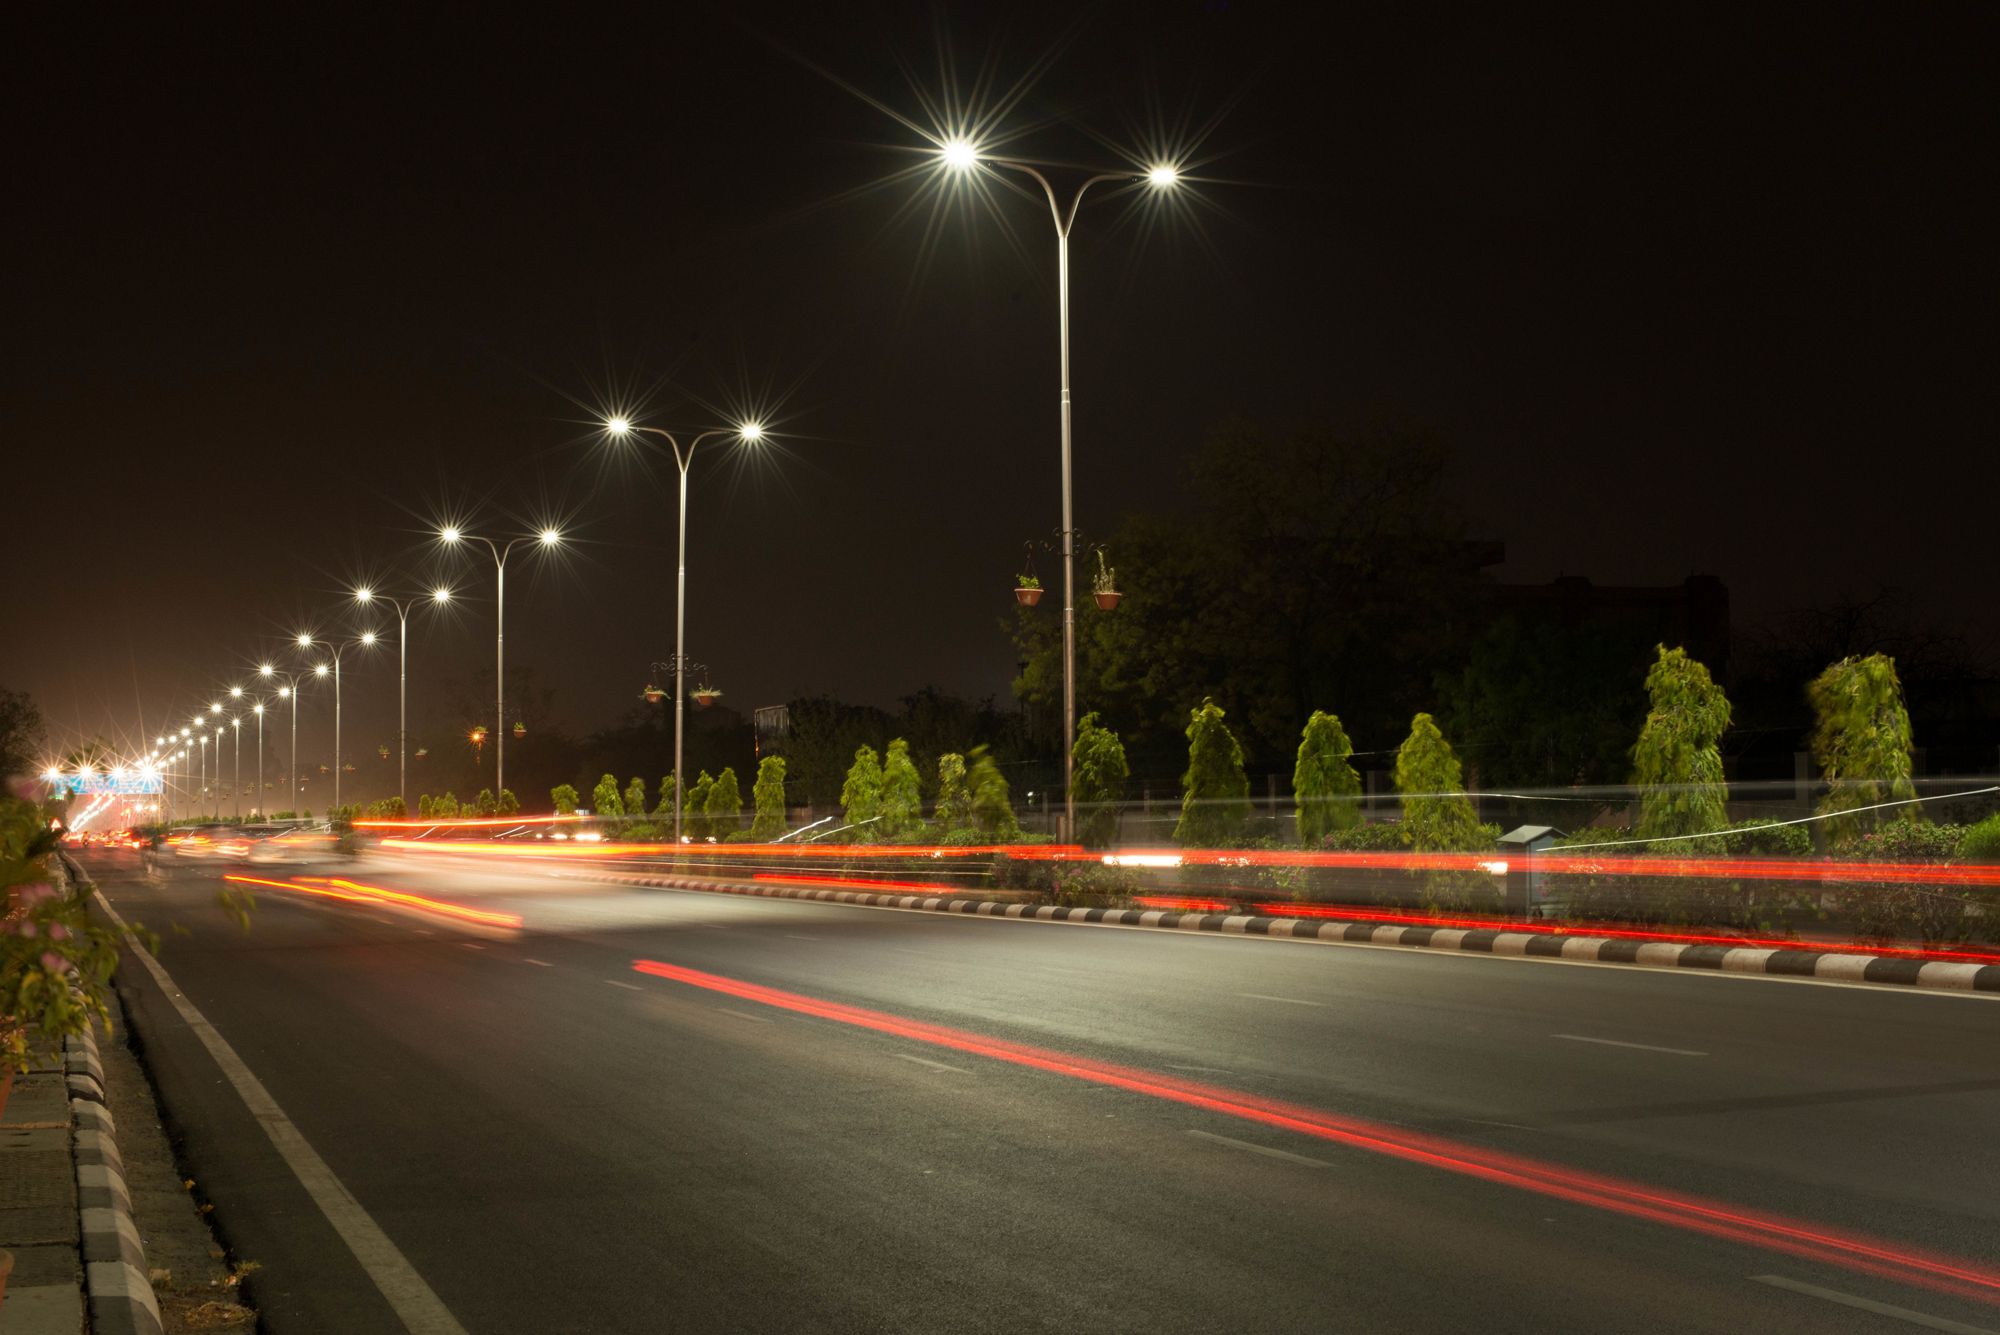 Well-lit streets of Jaipur city at night, thanks to IFC’s PPP project on energy-efficient streetlights.